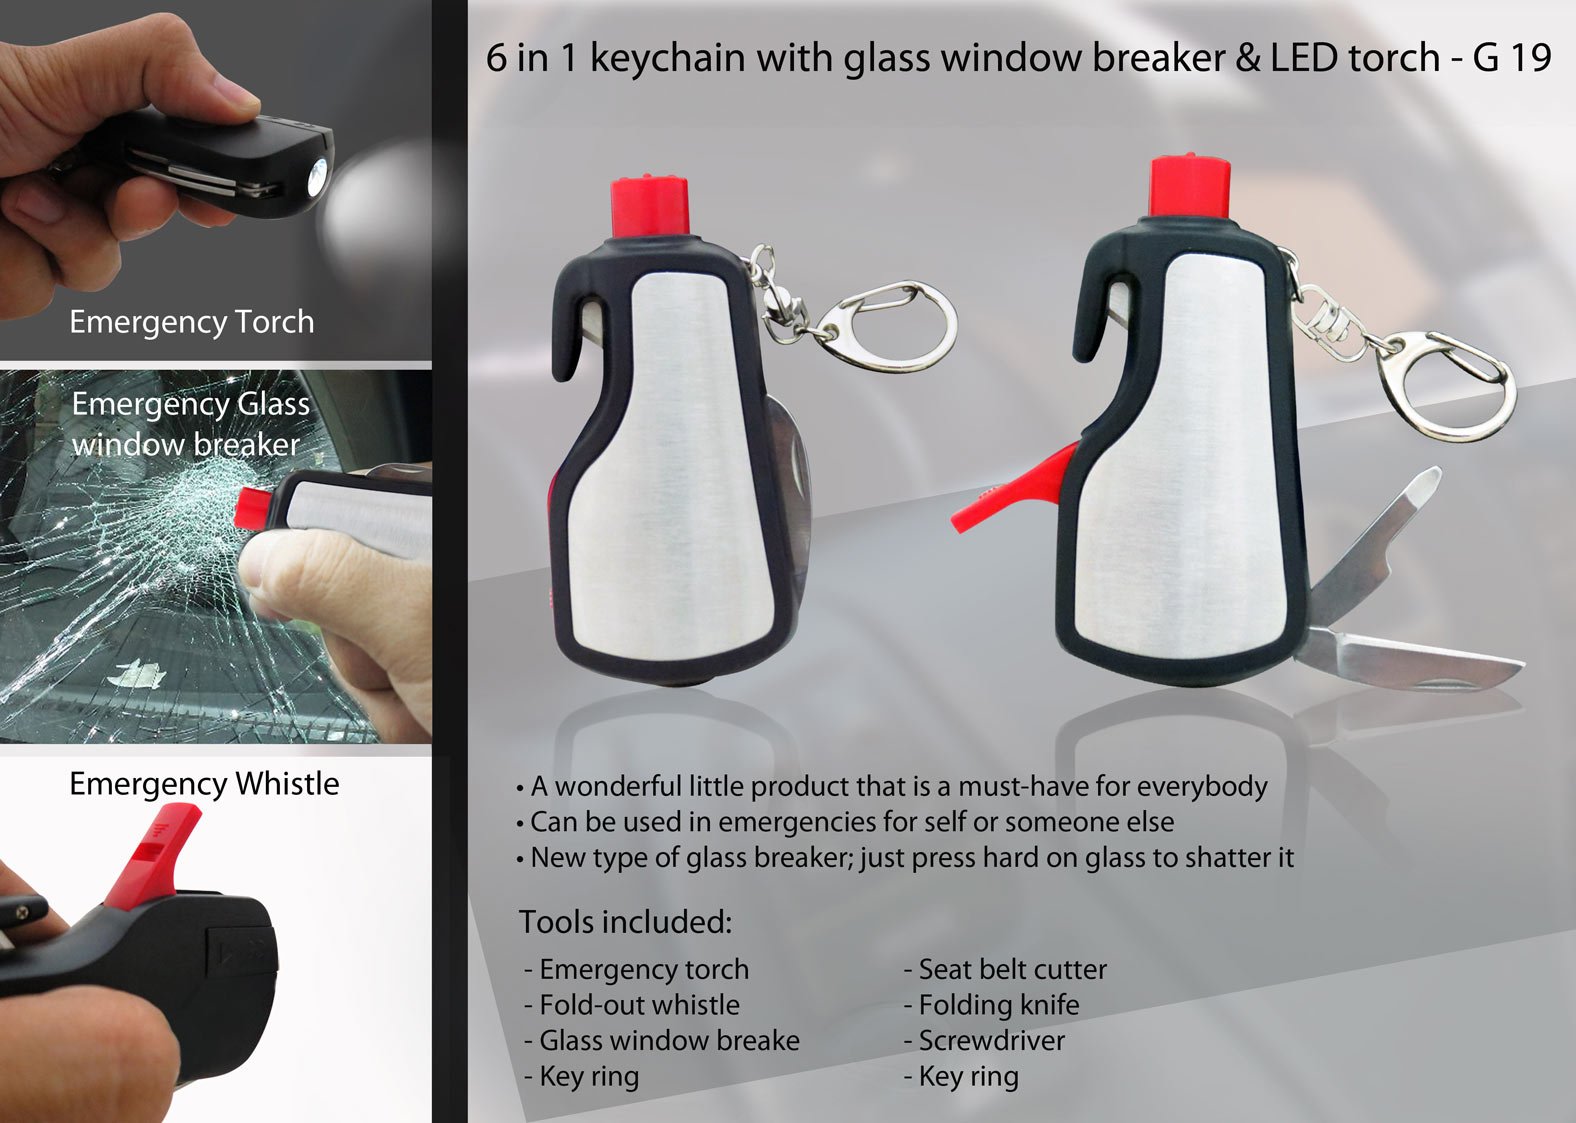 6 in 1 keychain with glass window breaker & LED torch - Power Plus